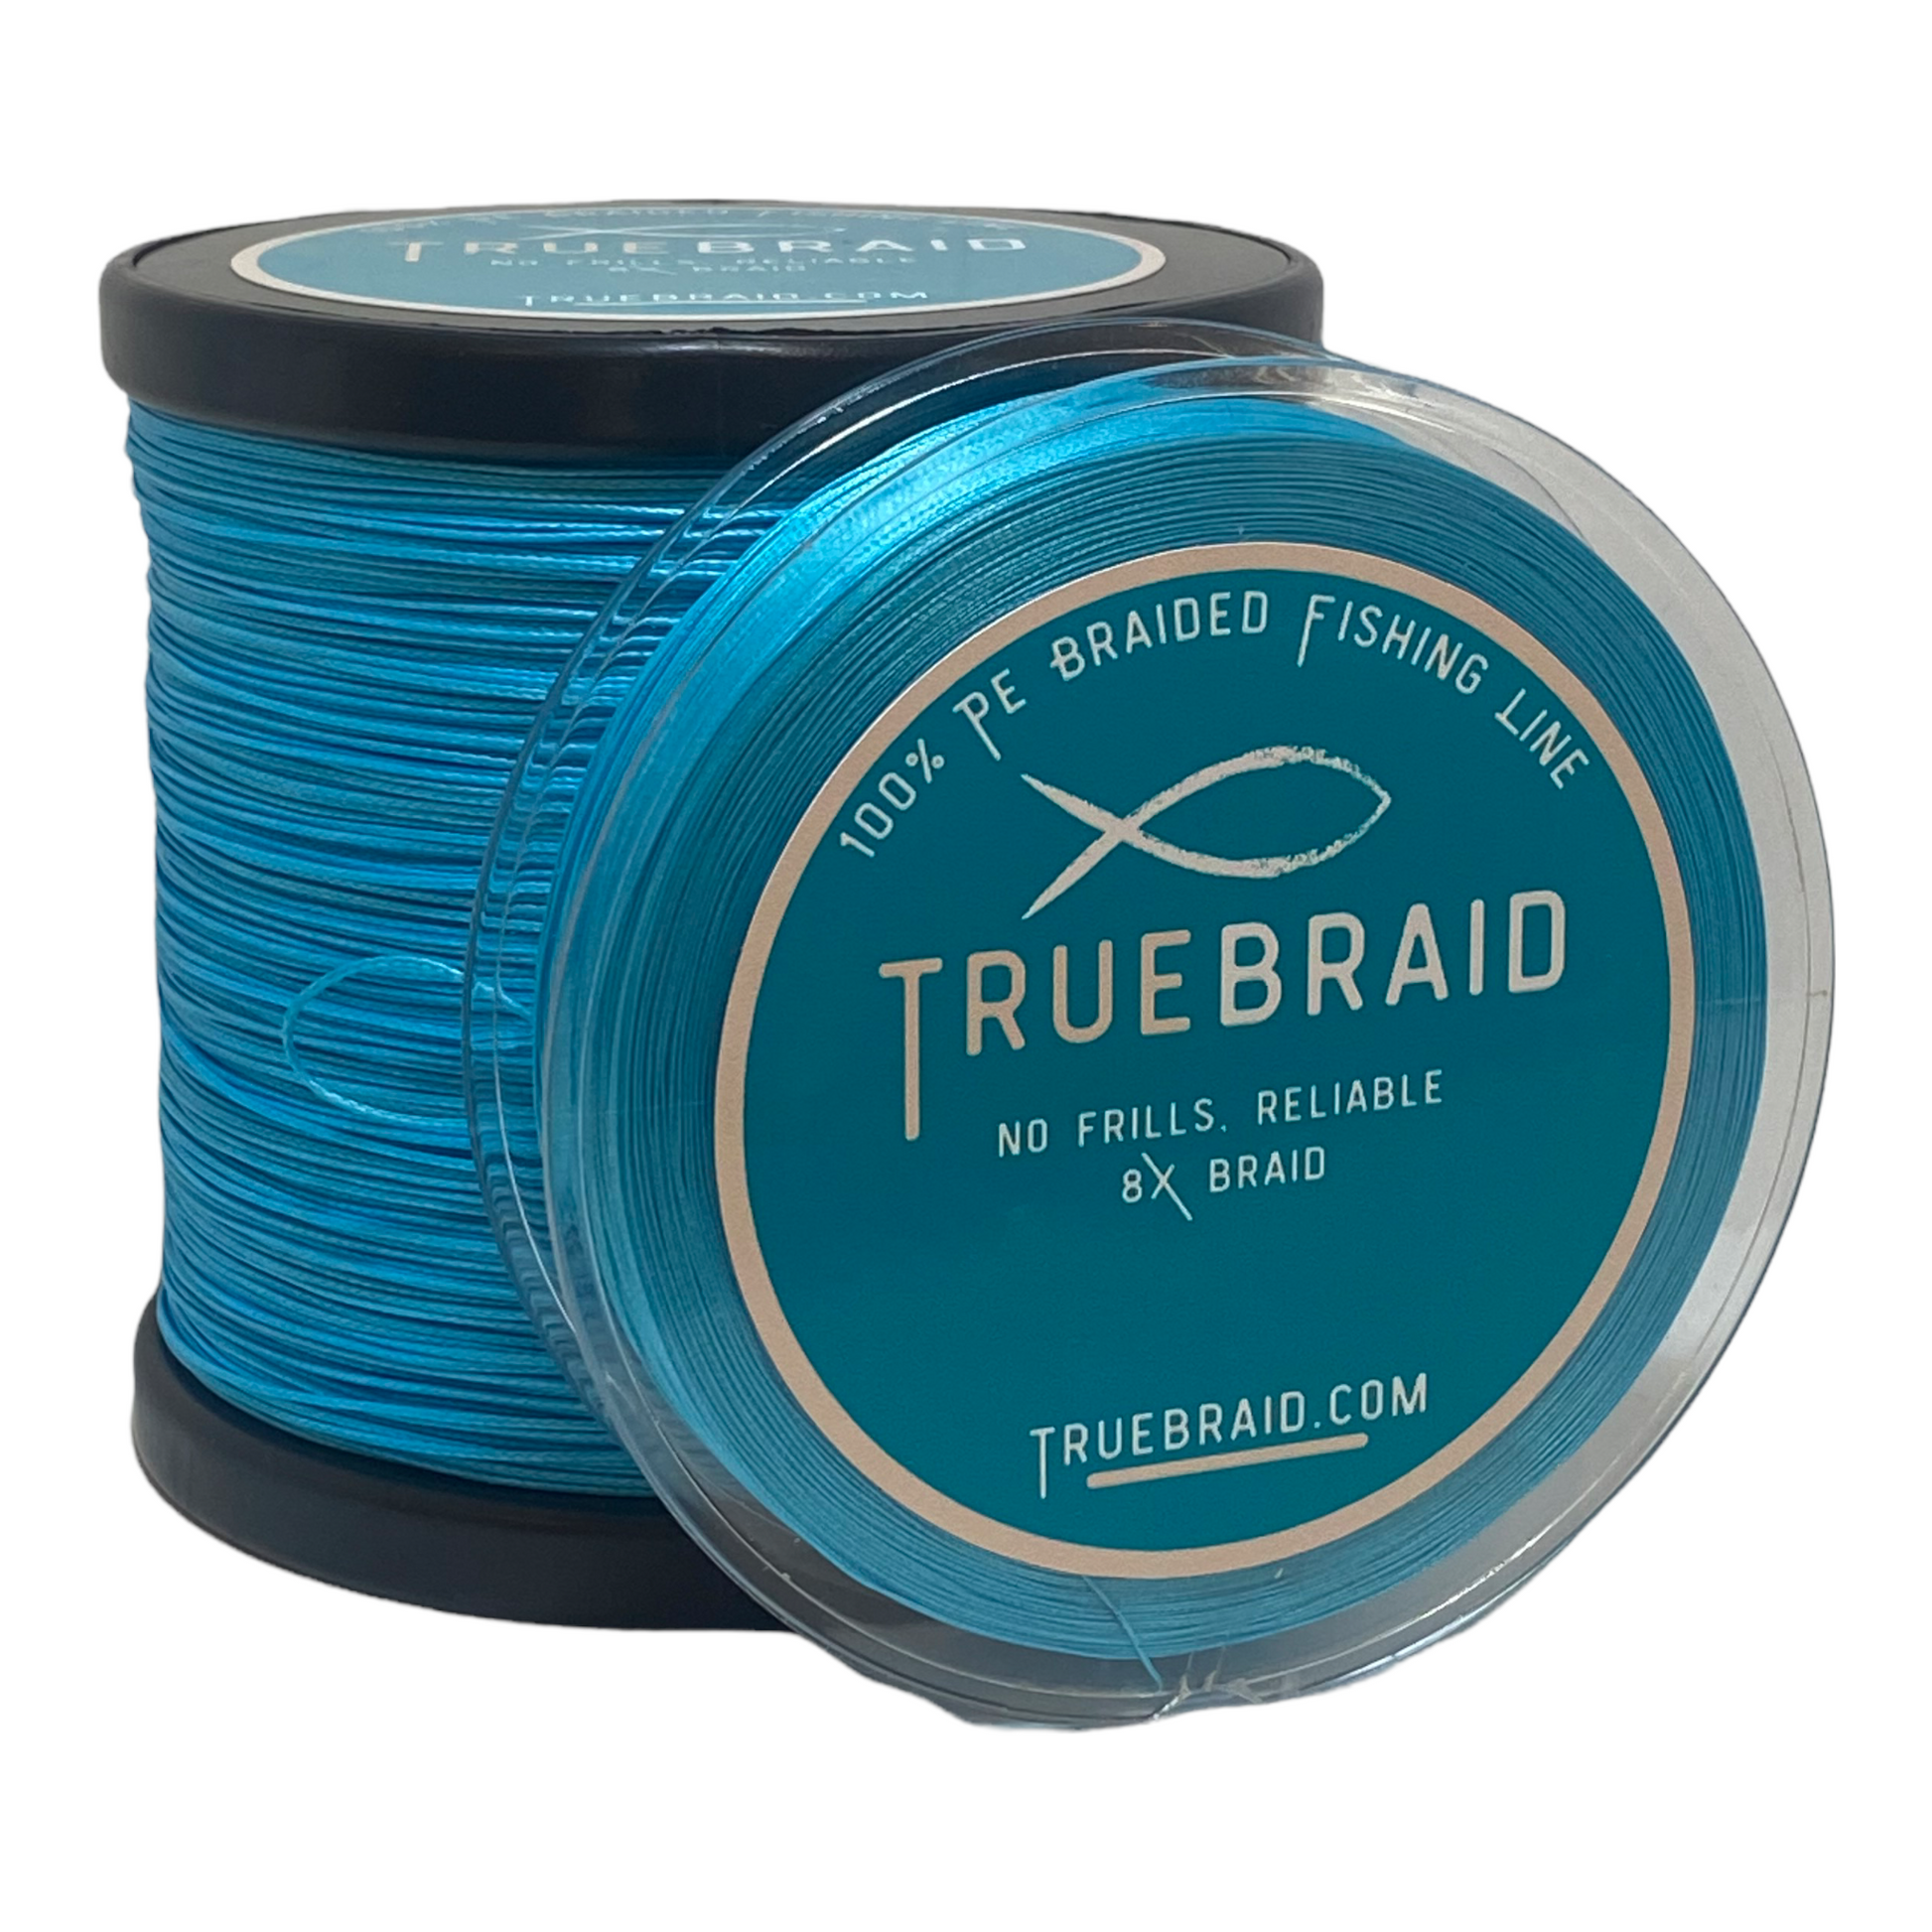 Mounchain Braided Fishing Line 328yds 8 Strands Abrasion Resistant 100% PE Sensitive Braided Line for Saltwater or Freshwater, 30lb, Yellow, Size